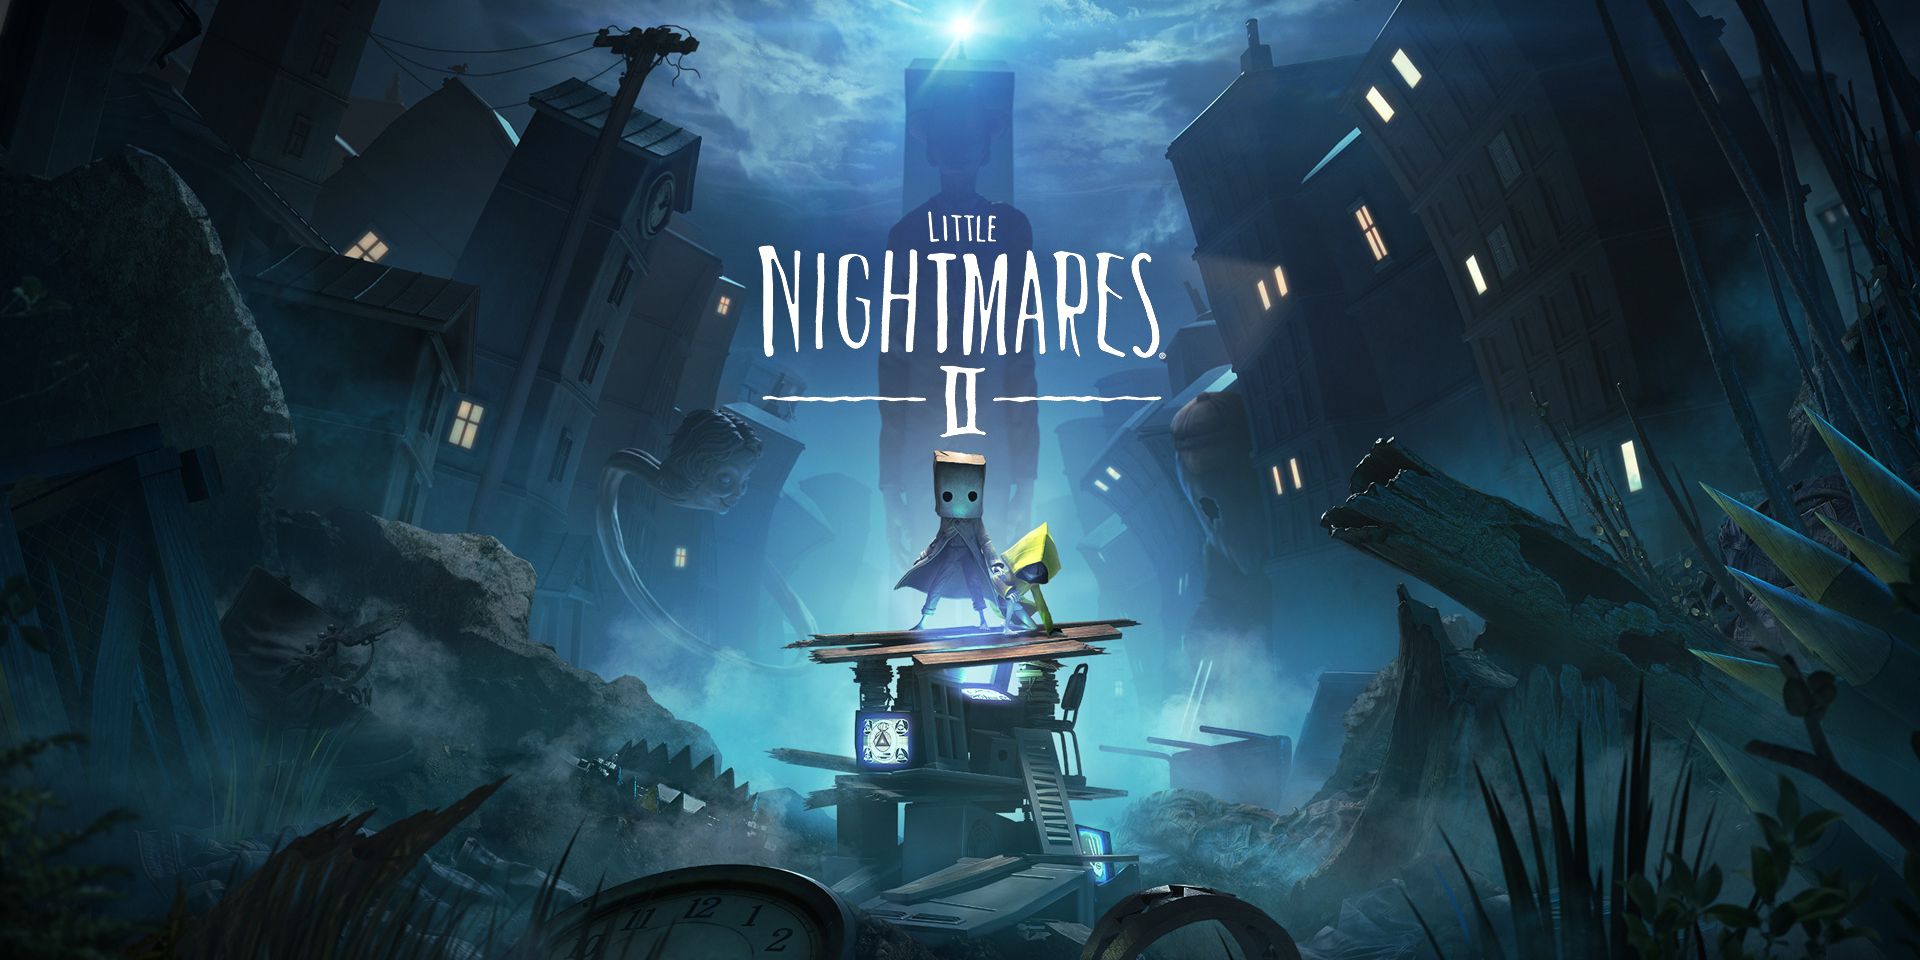 What Little Nightmares Ending & DLC Means For Little Nightmares 2